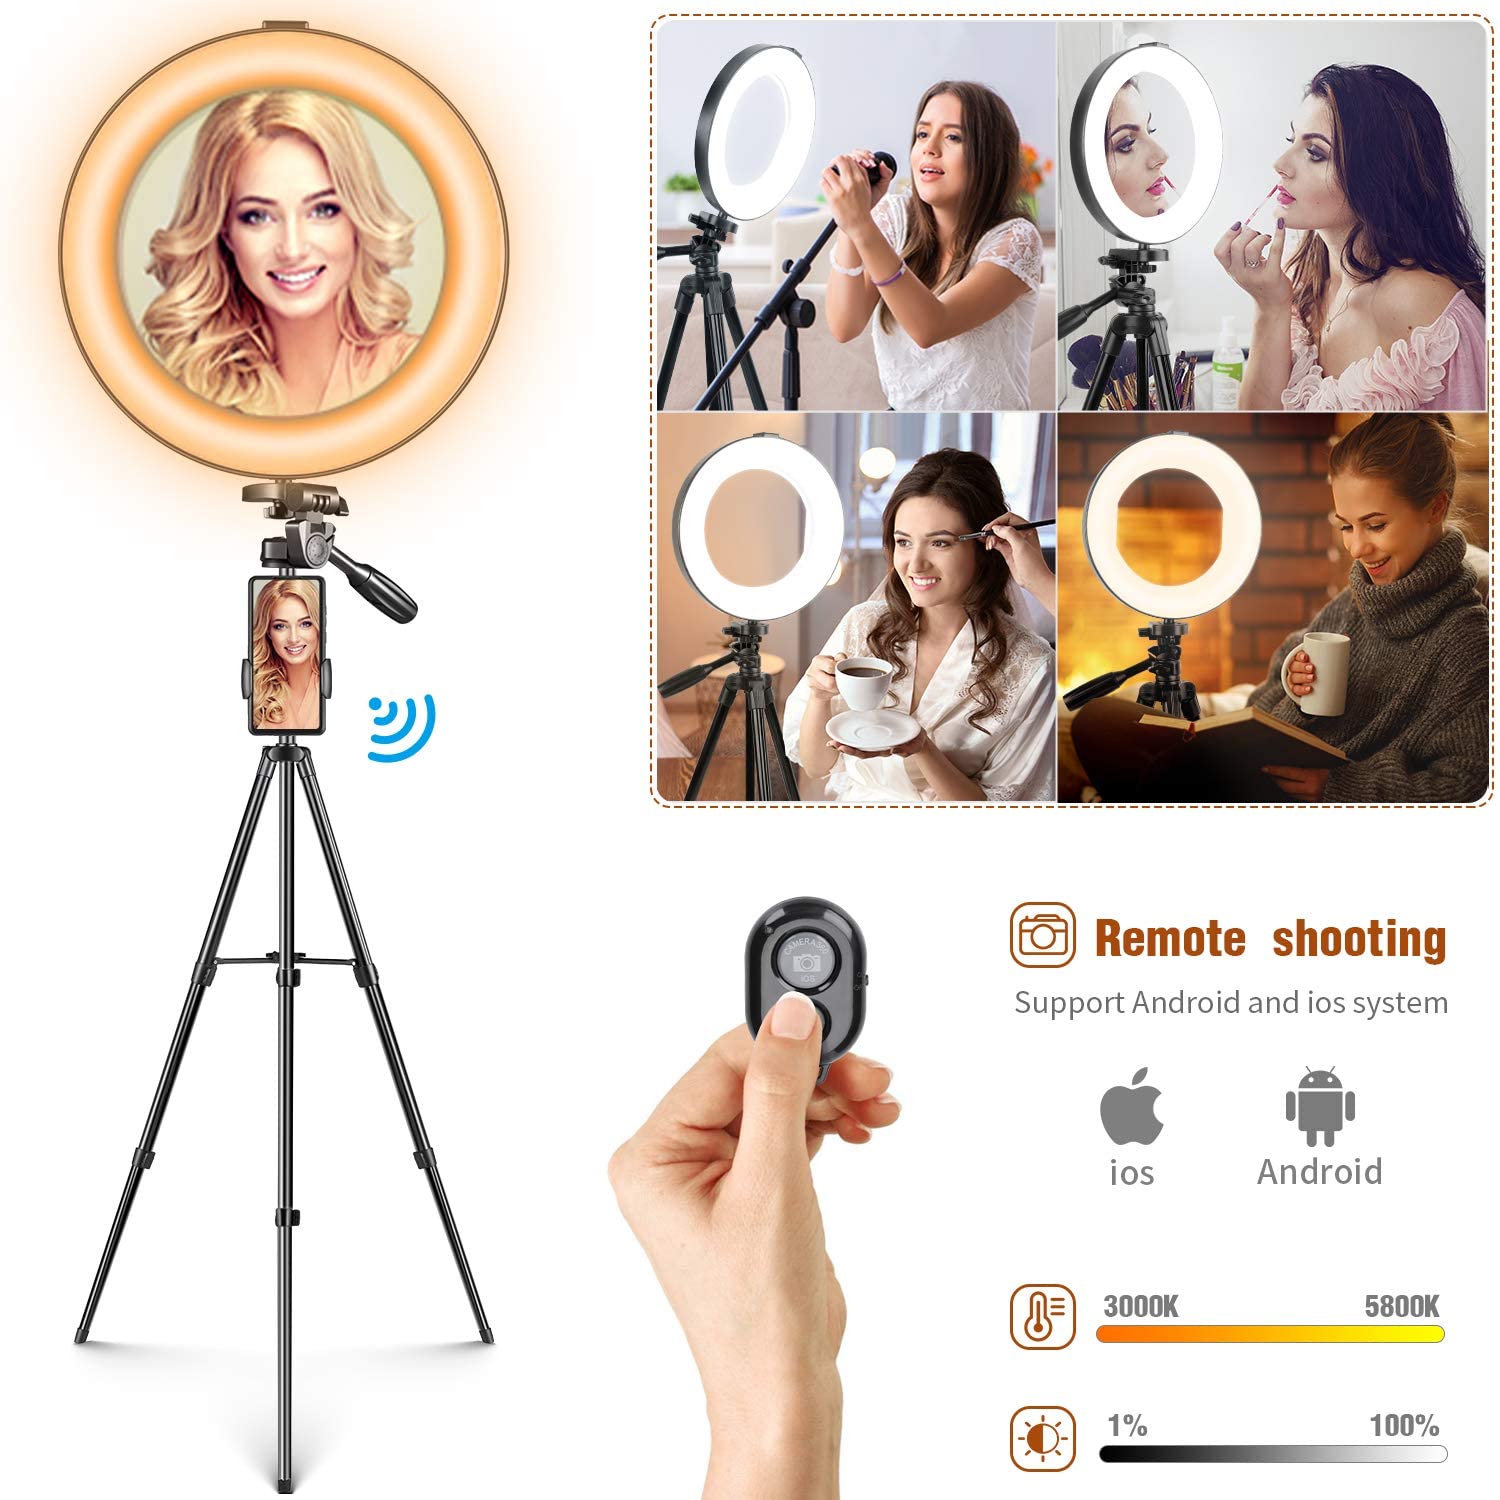 Neewer 10-inch RGB Ring Light Selfie Light Ring with Tripod Stand & Phone  Holder